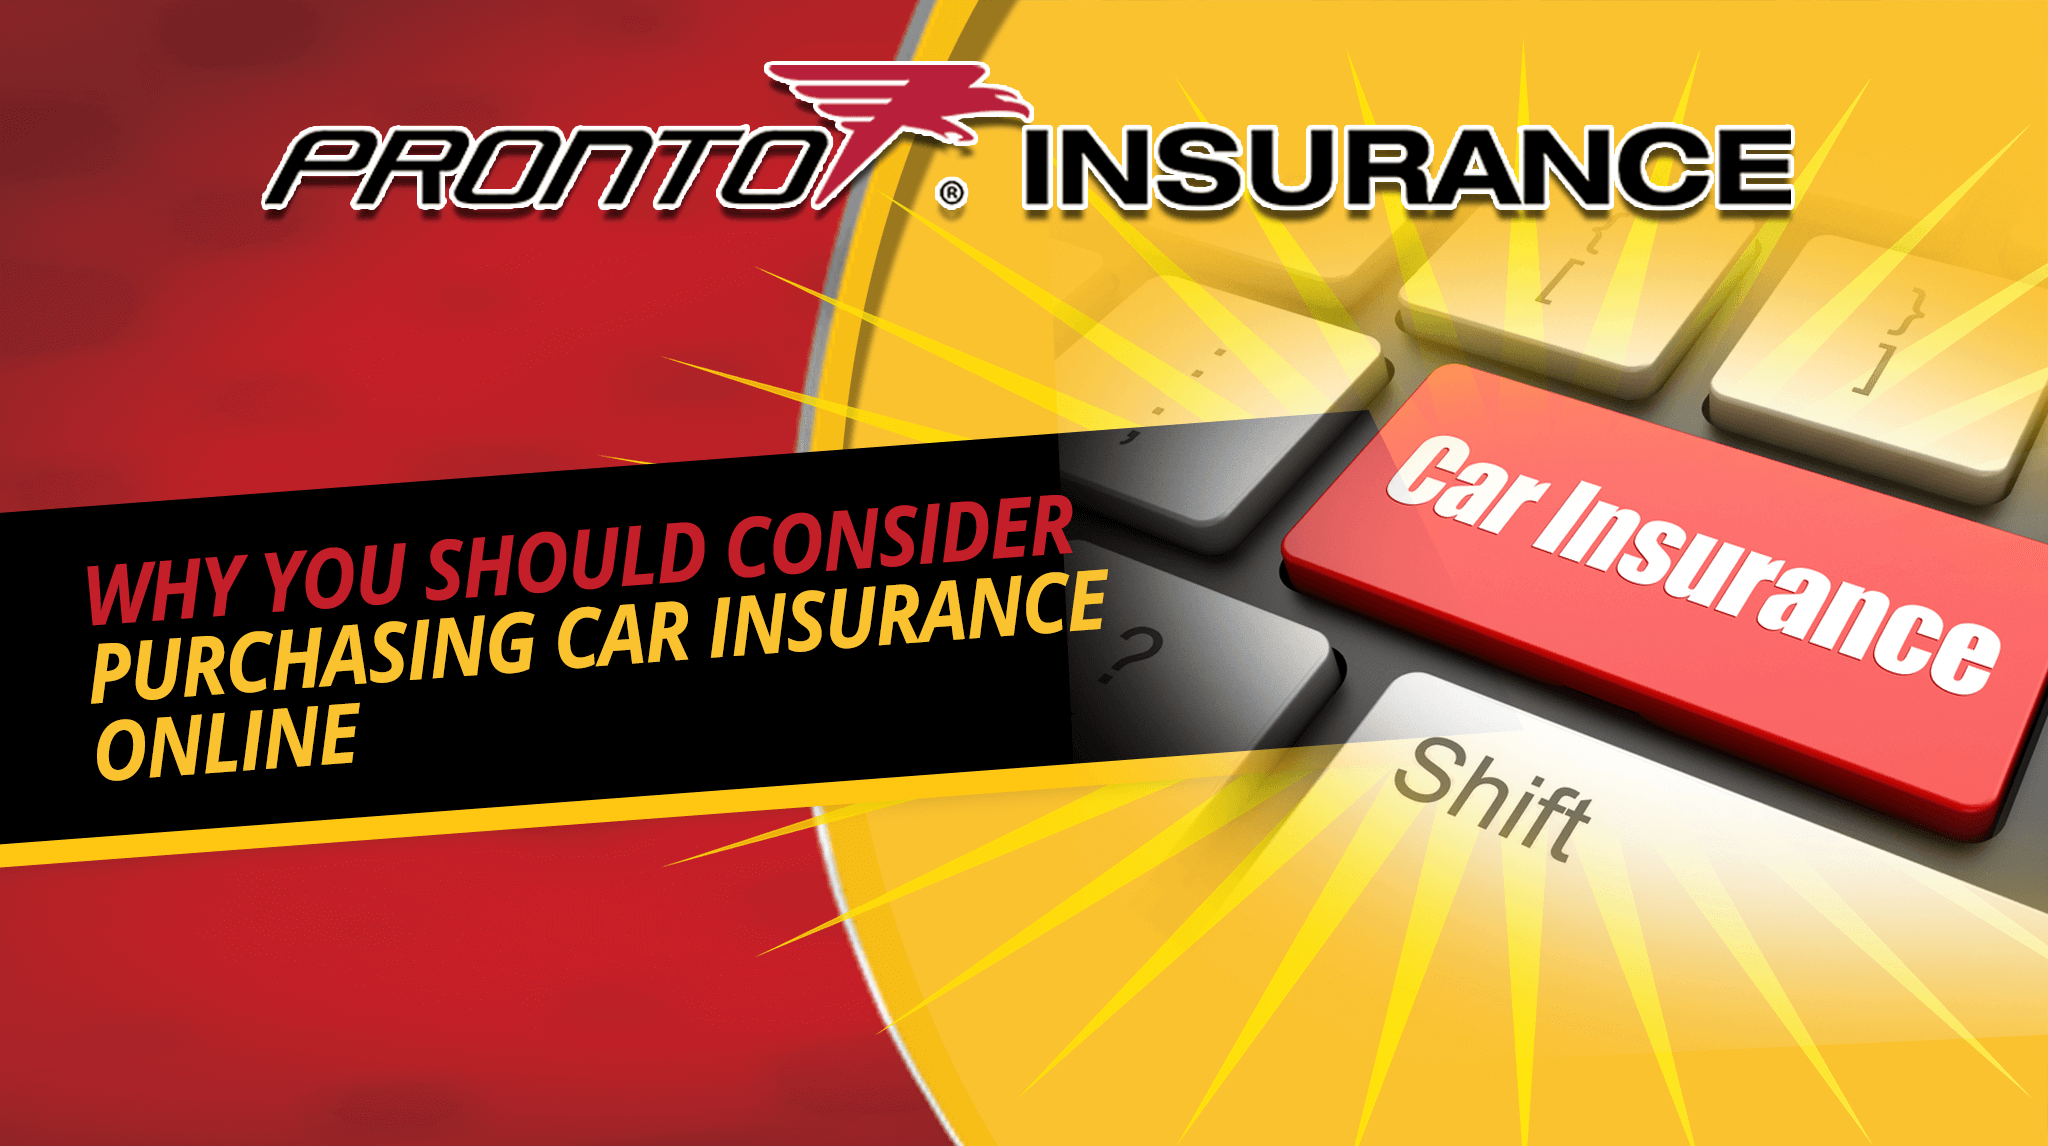 Why You Should Consider Purchasing Car Insurance Online